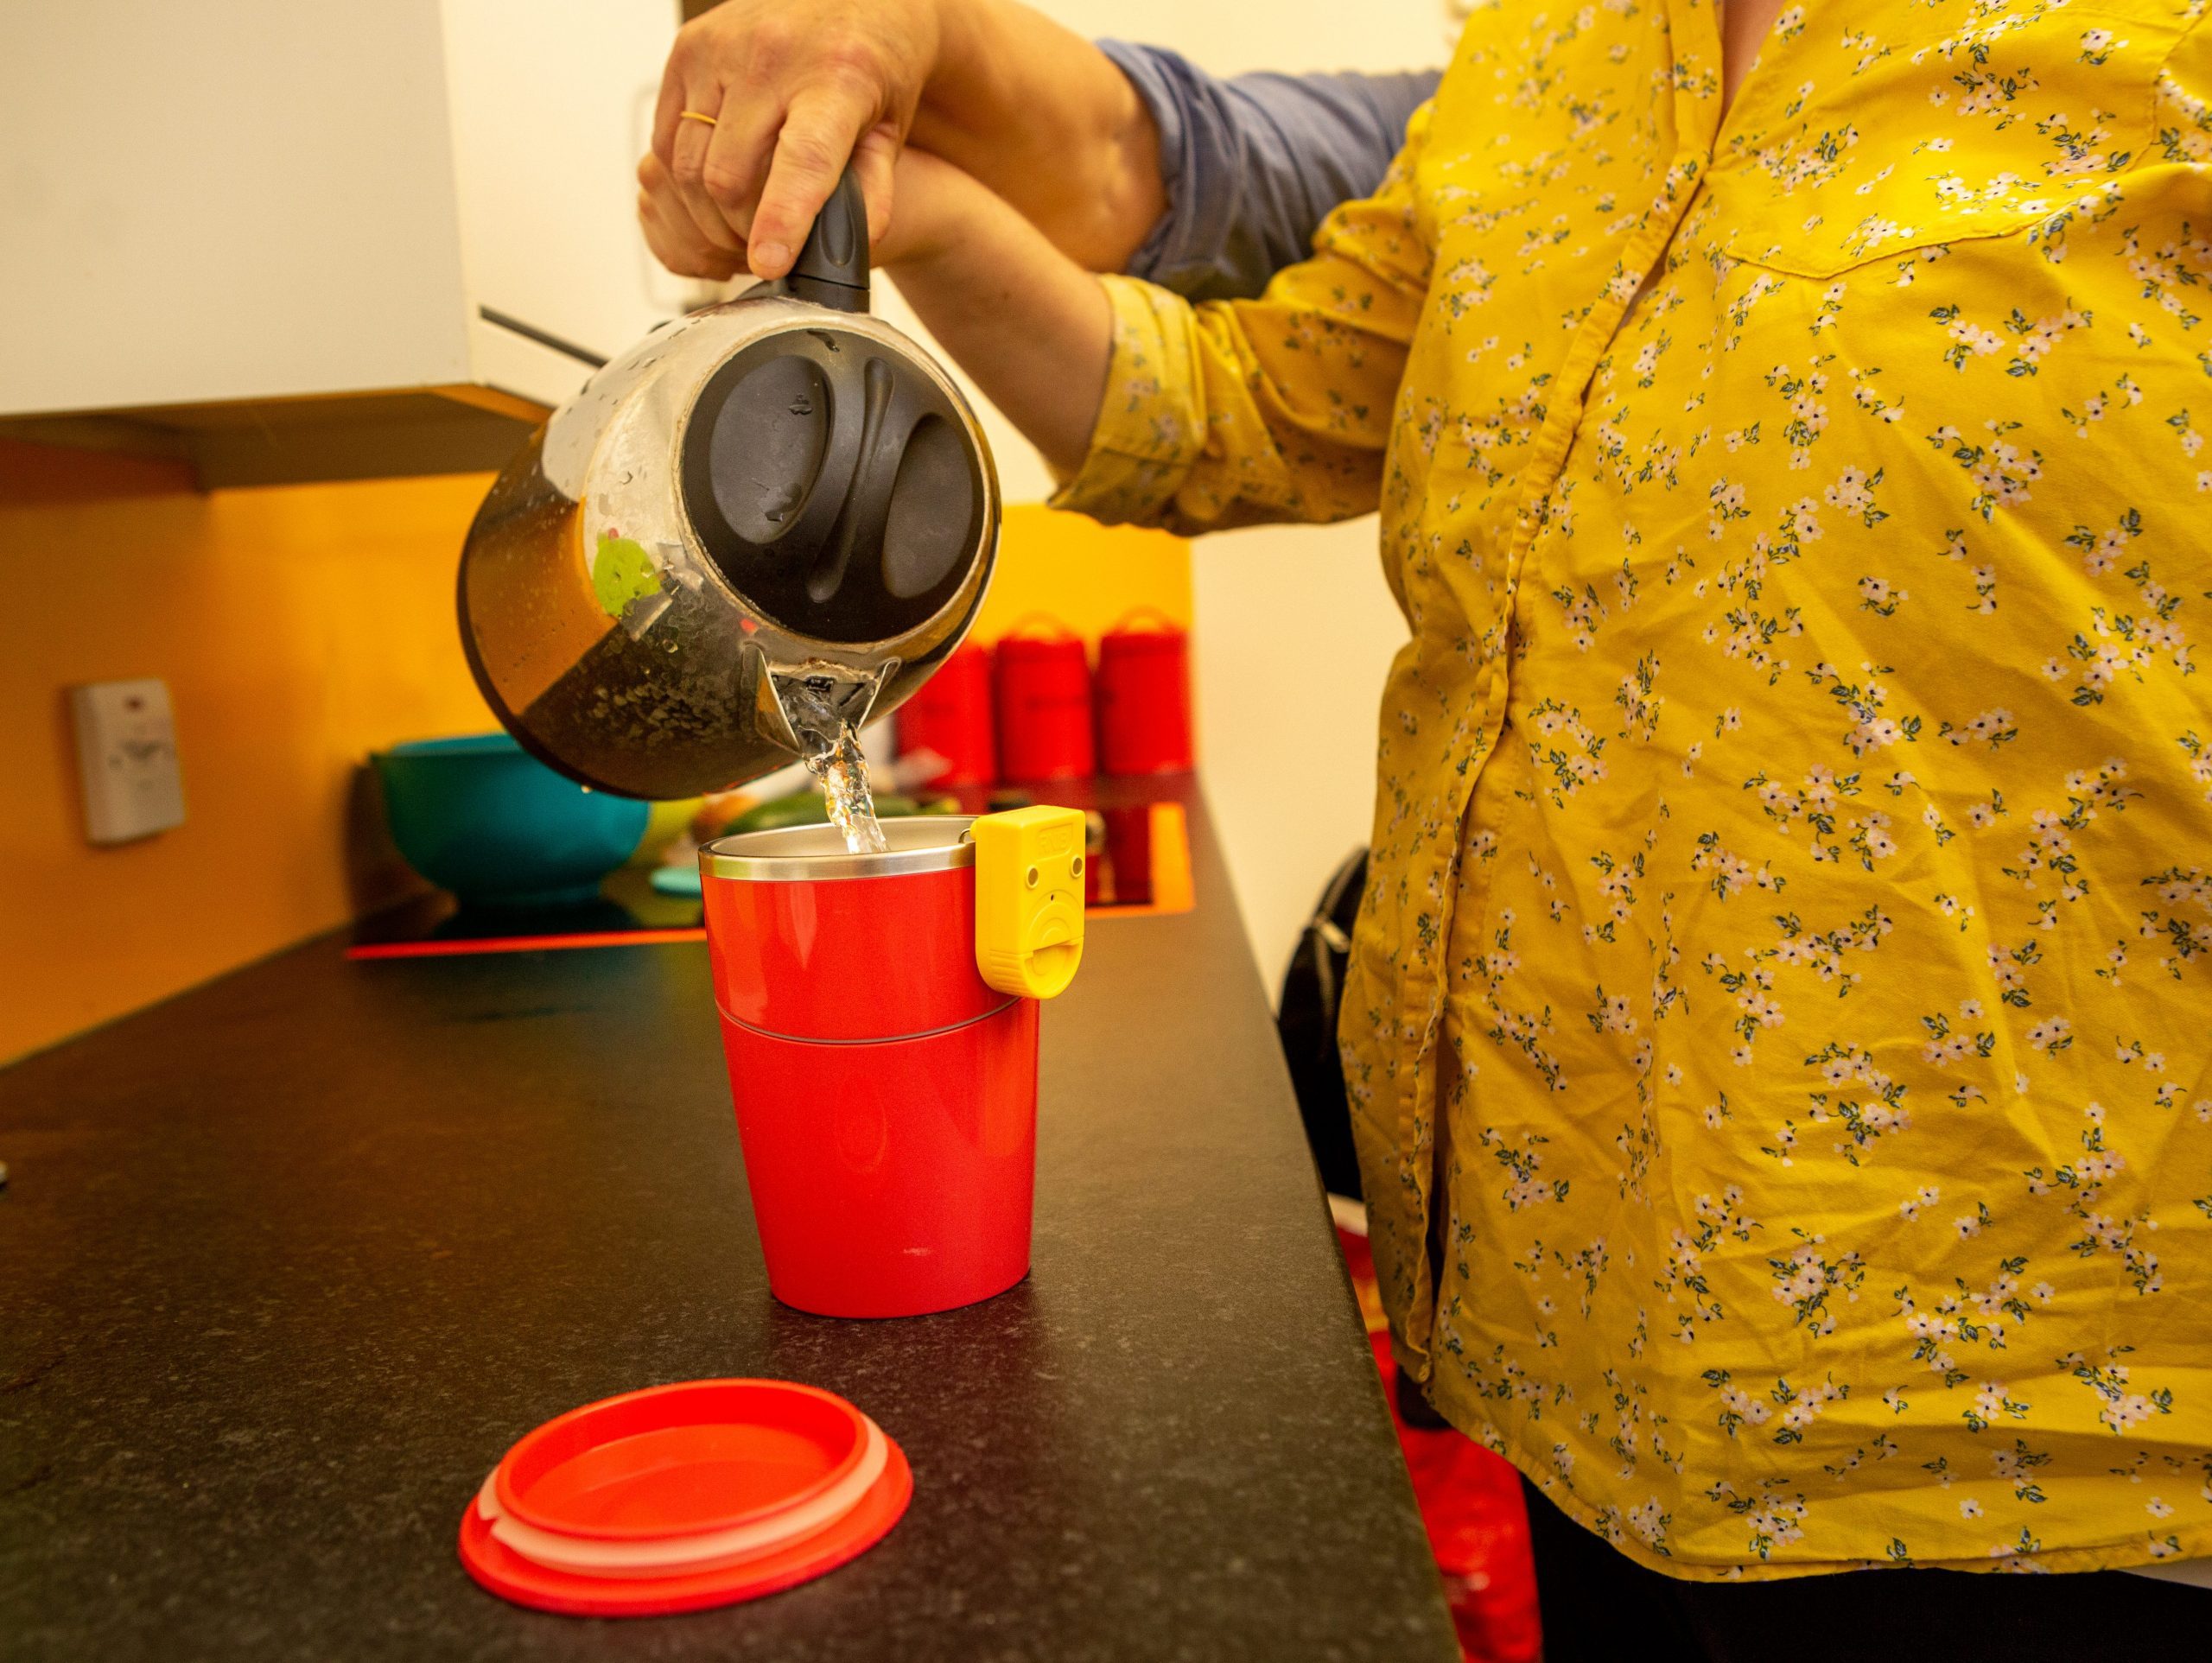 The image shows a persons hands with a kettle of boiling water, they are learning to make a cup of tea using a suction cup and a liquid level indicator.